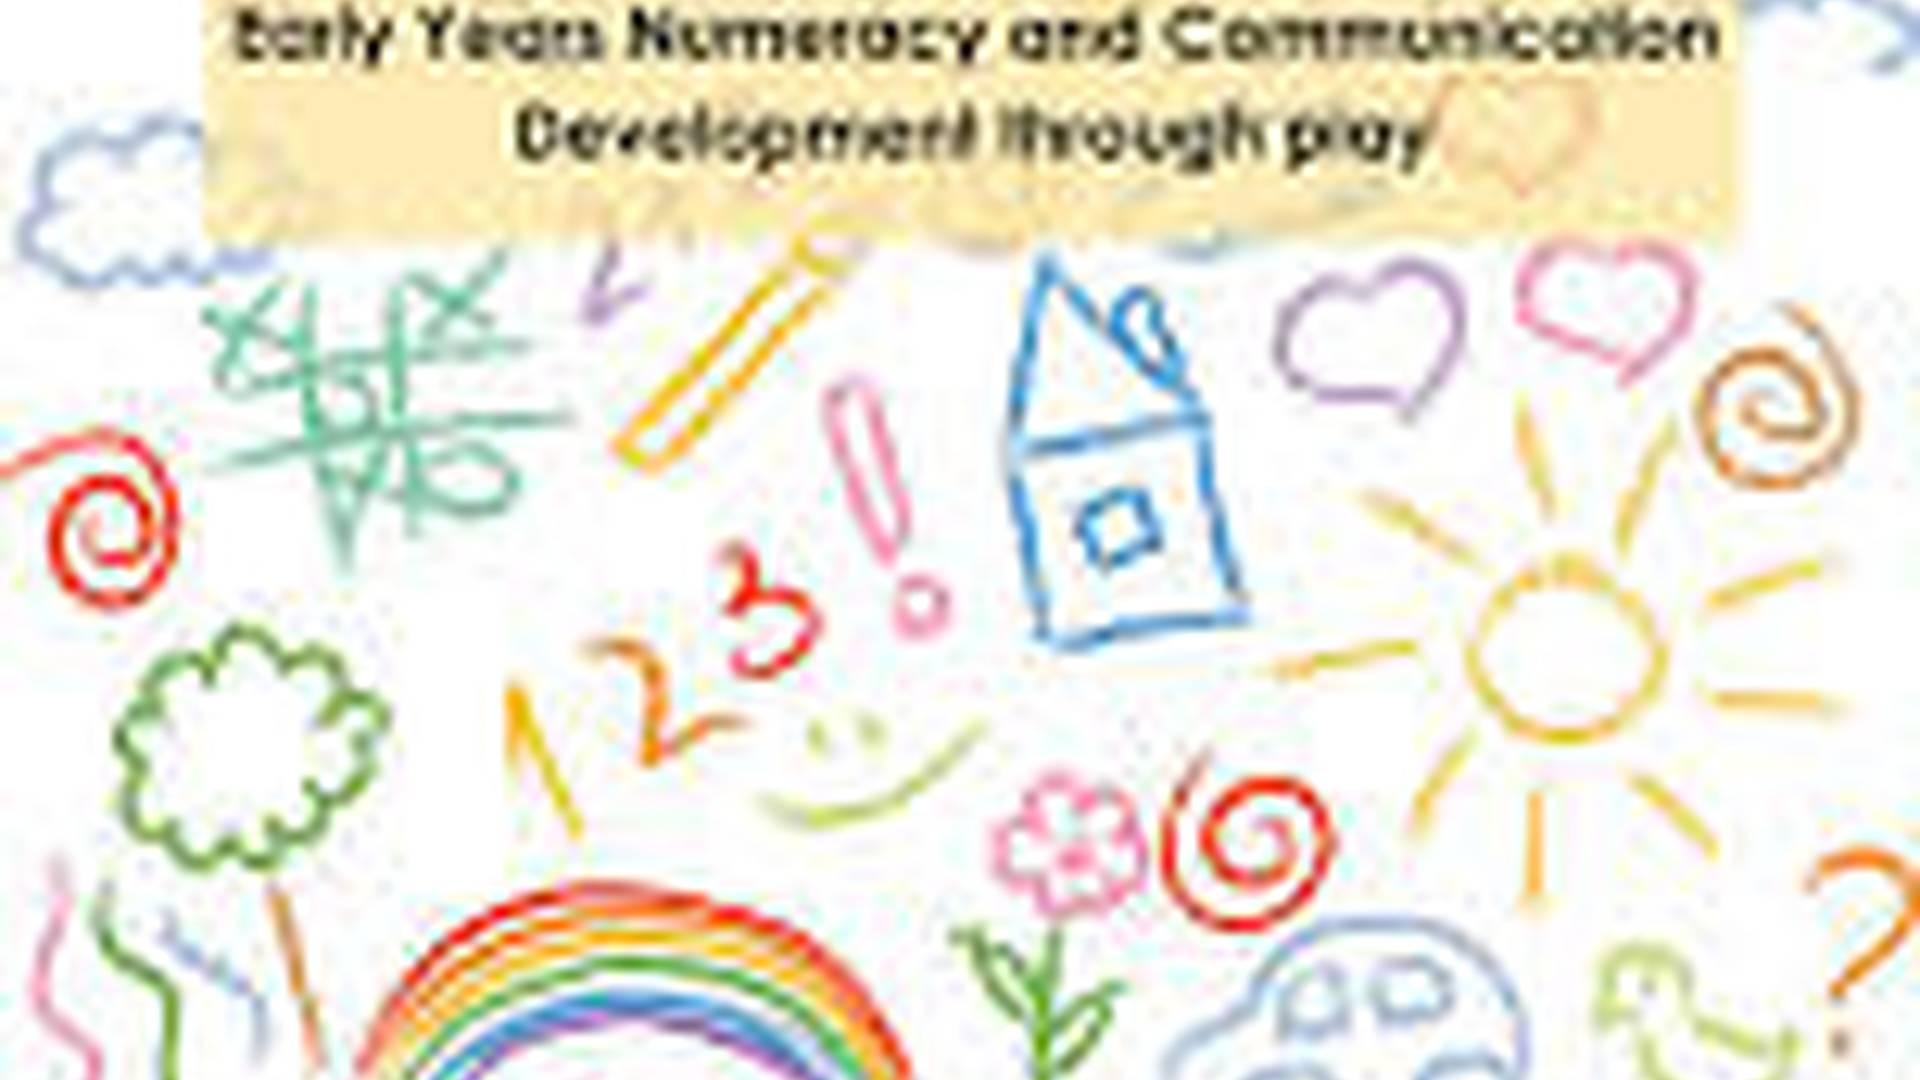 Early Years Numeracy and Communication Development photo